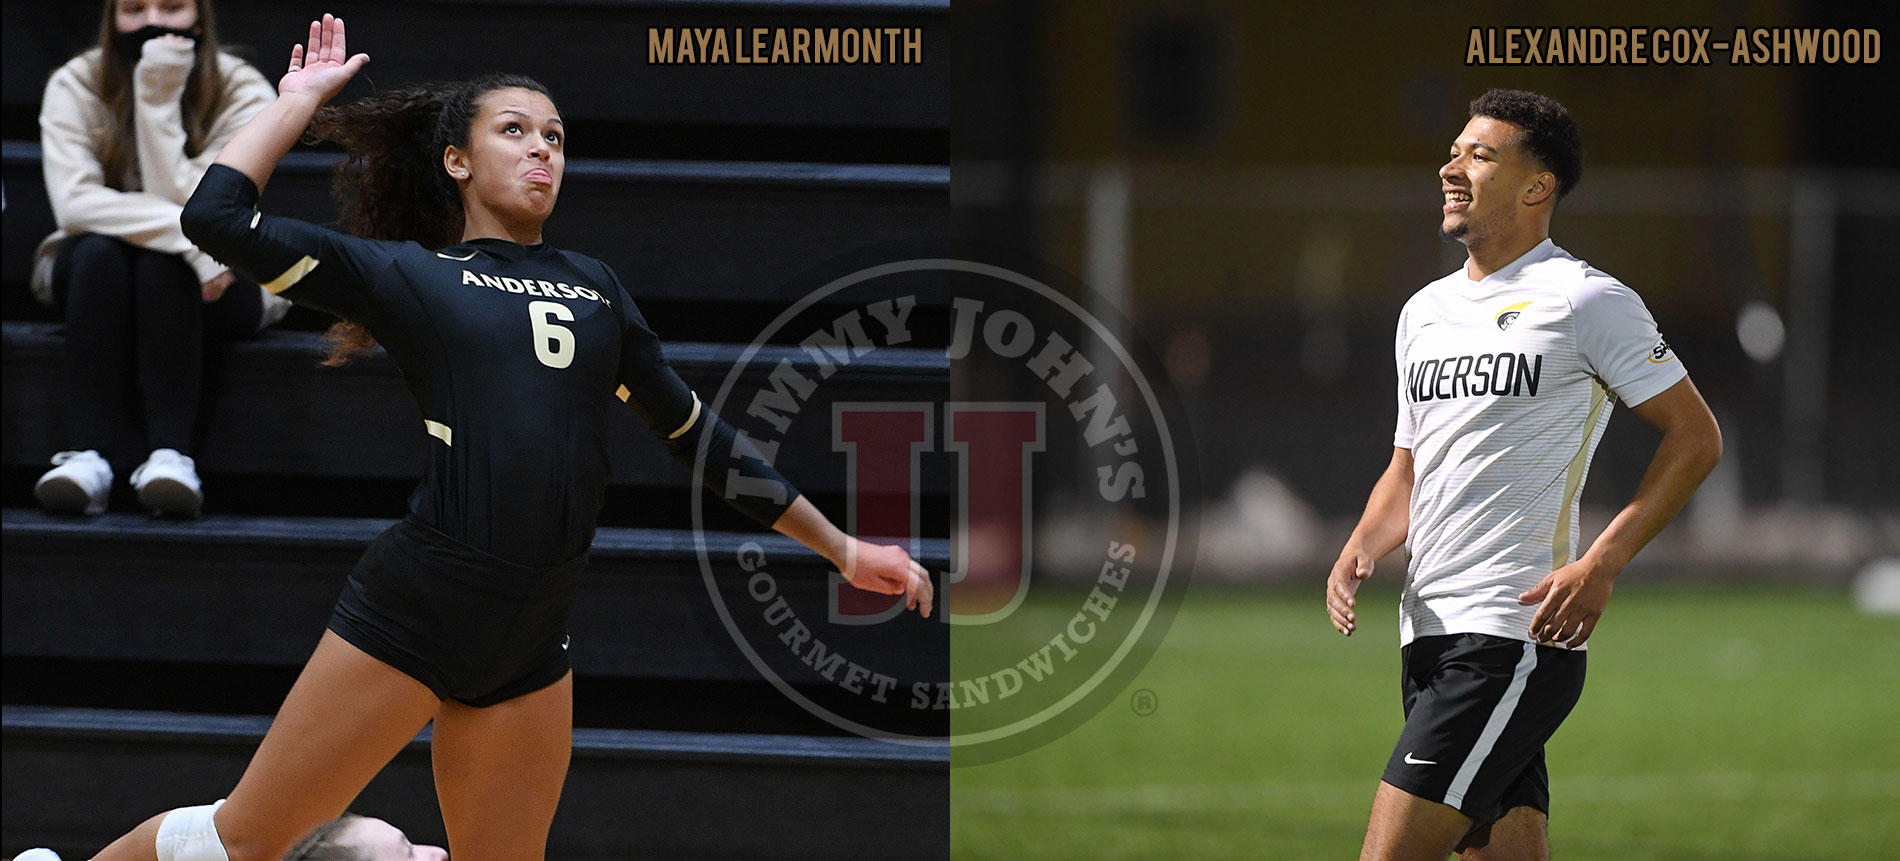 Maya Learmonth and Alexandre Cox-Ashwood Named Jimmy John’s Female and Male Athletes of the Week